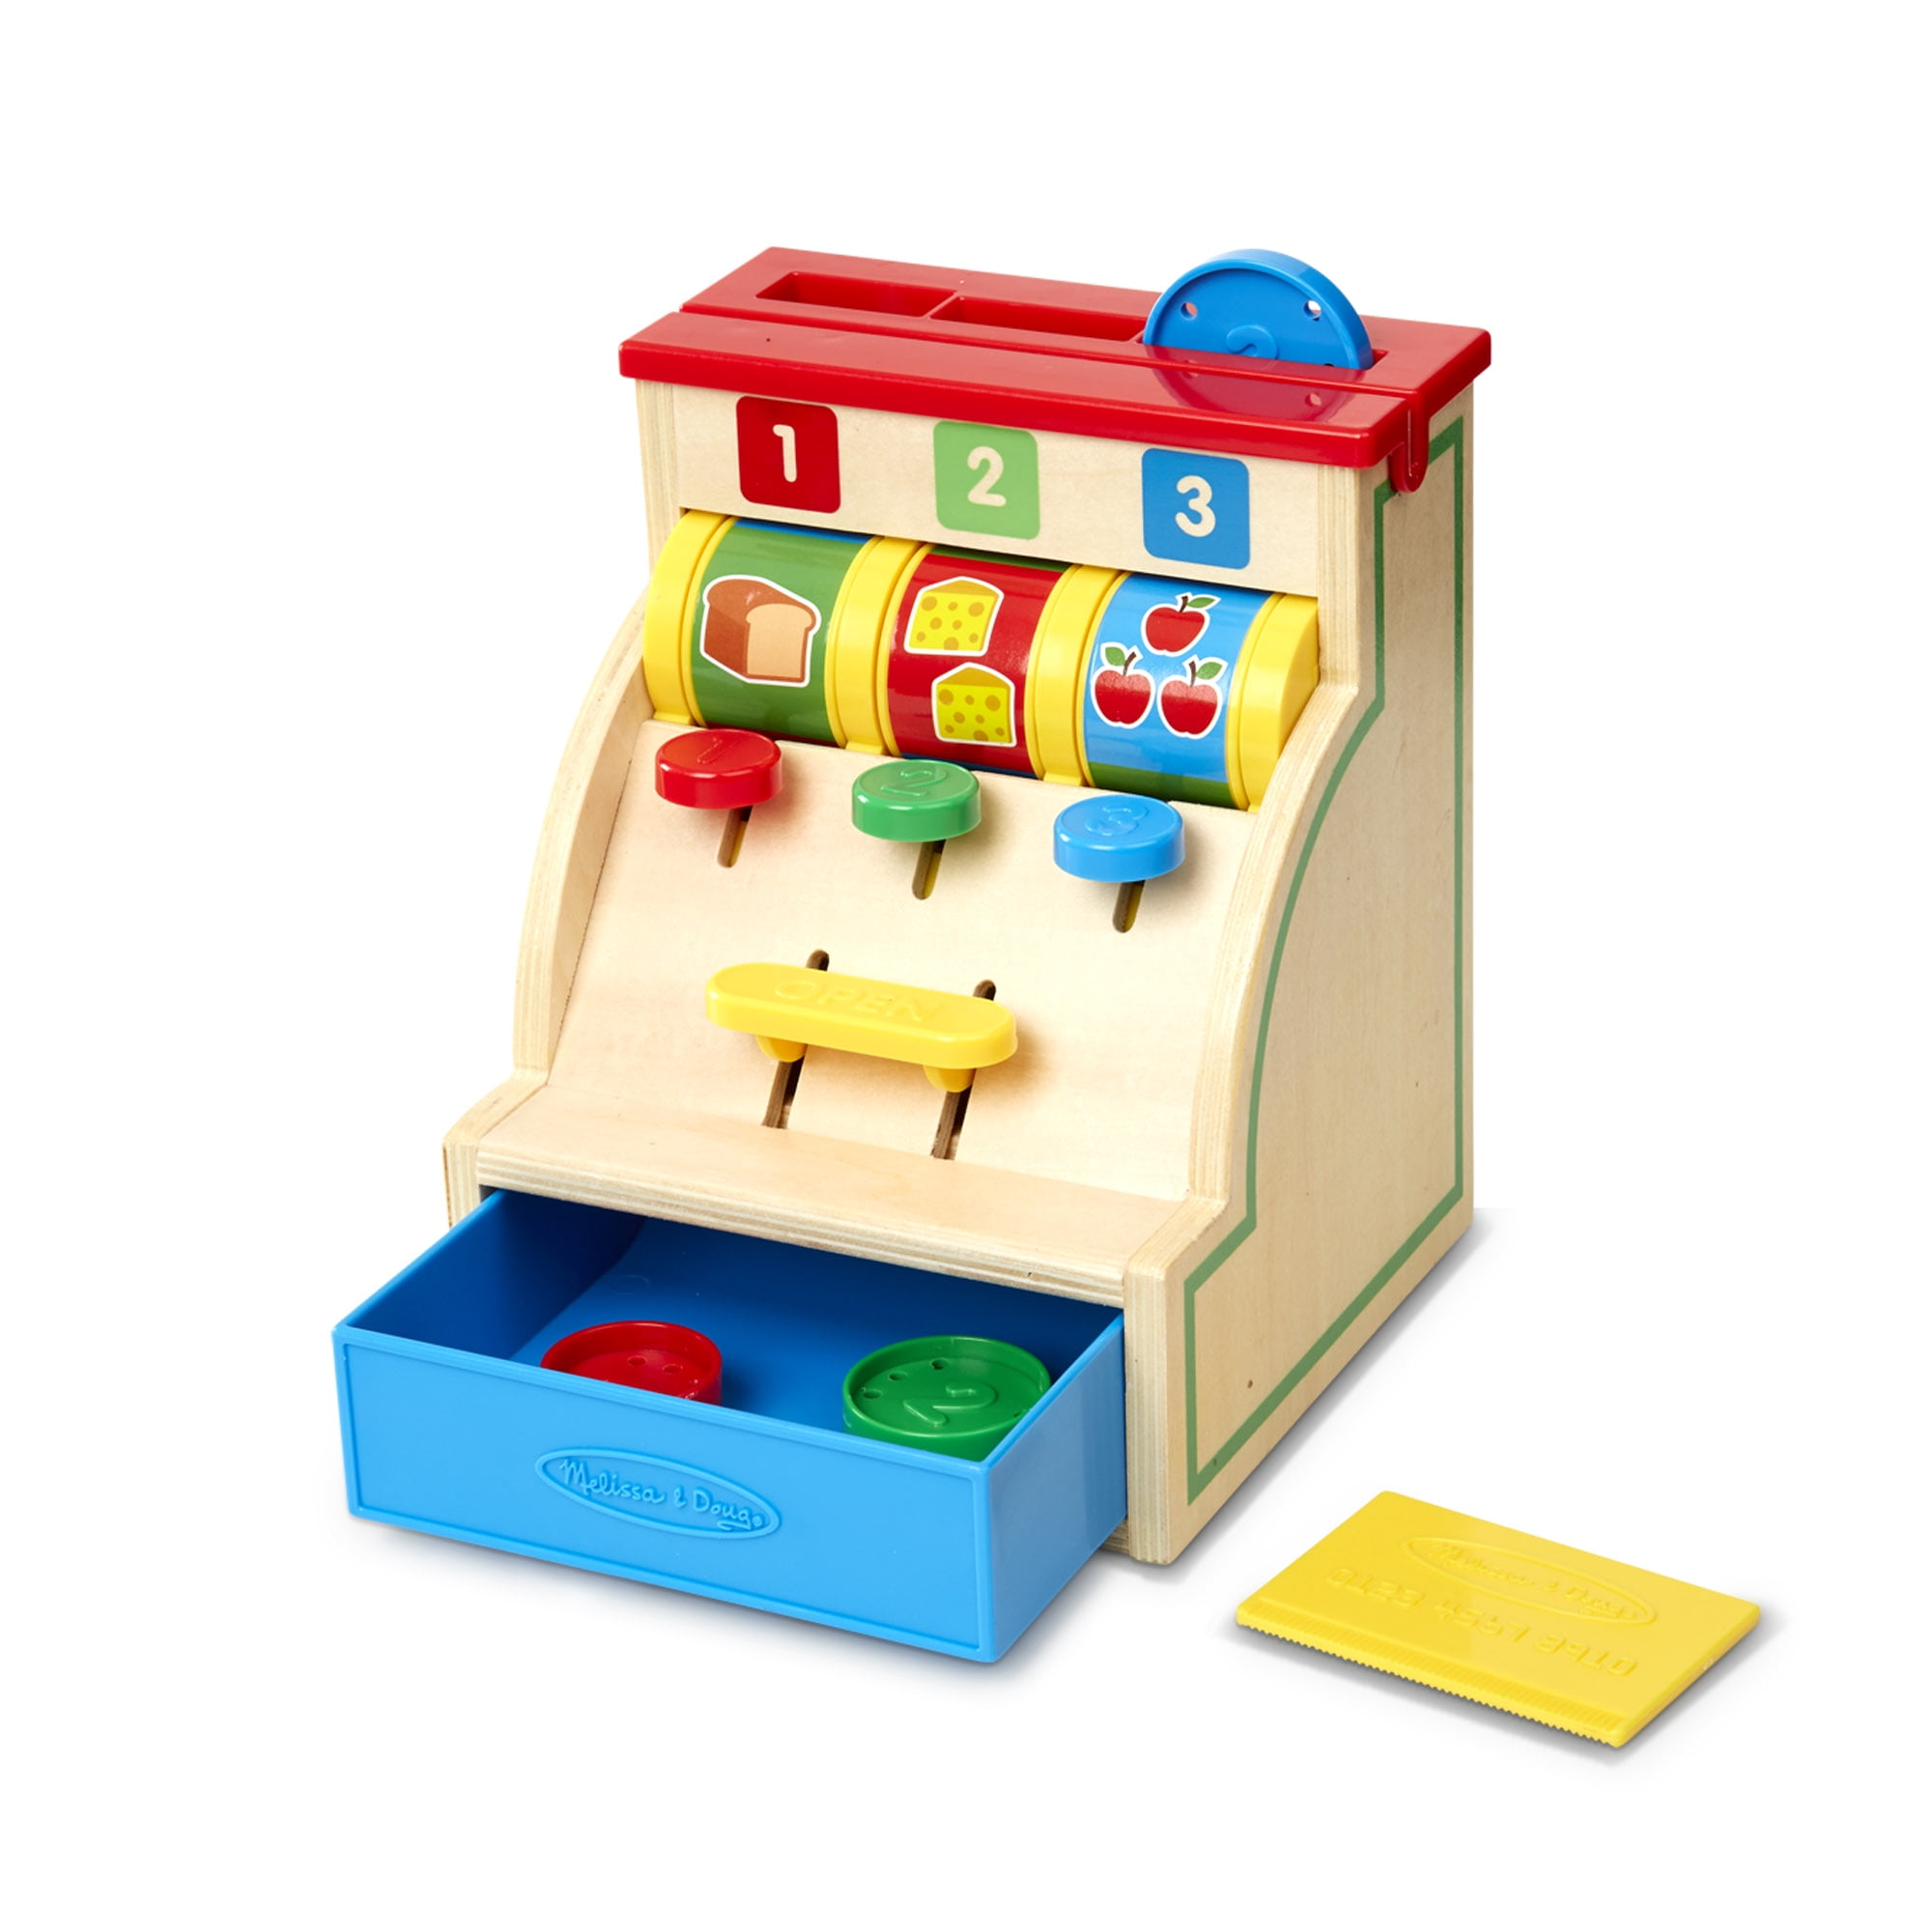 Pretend Credit Card Melissa & Doug Spin and Swipe Wooden Toy Cash Register with 3 Play Coins 